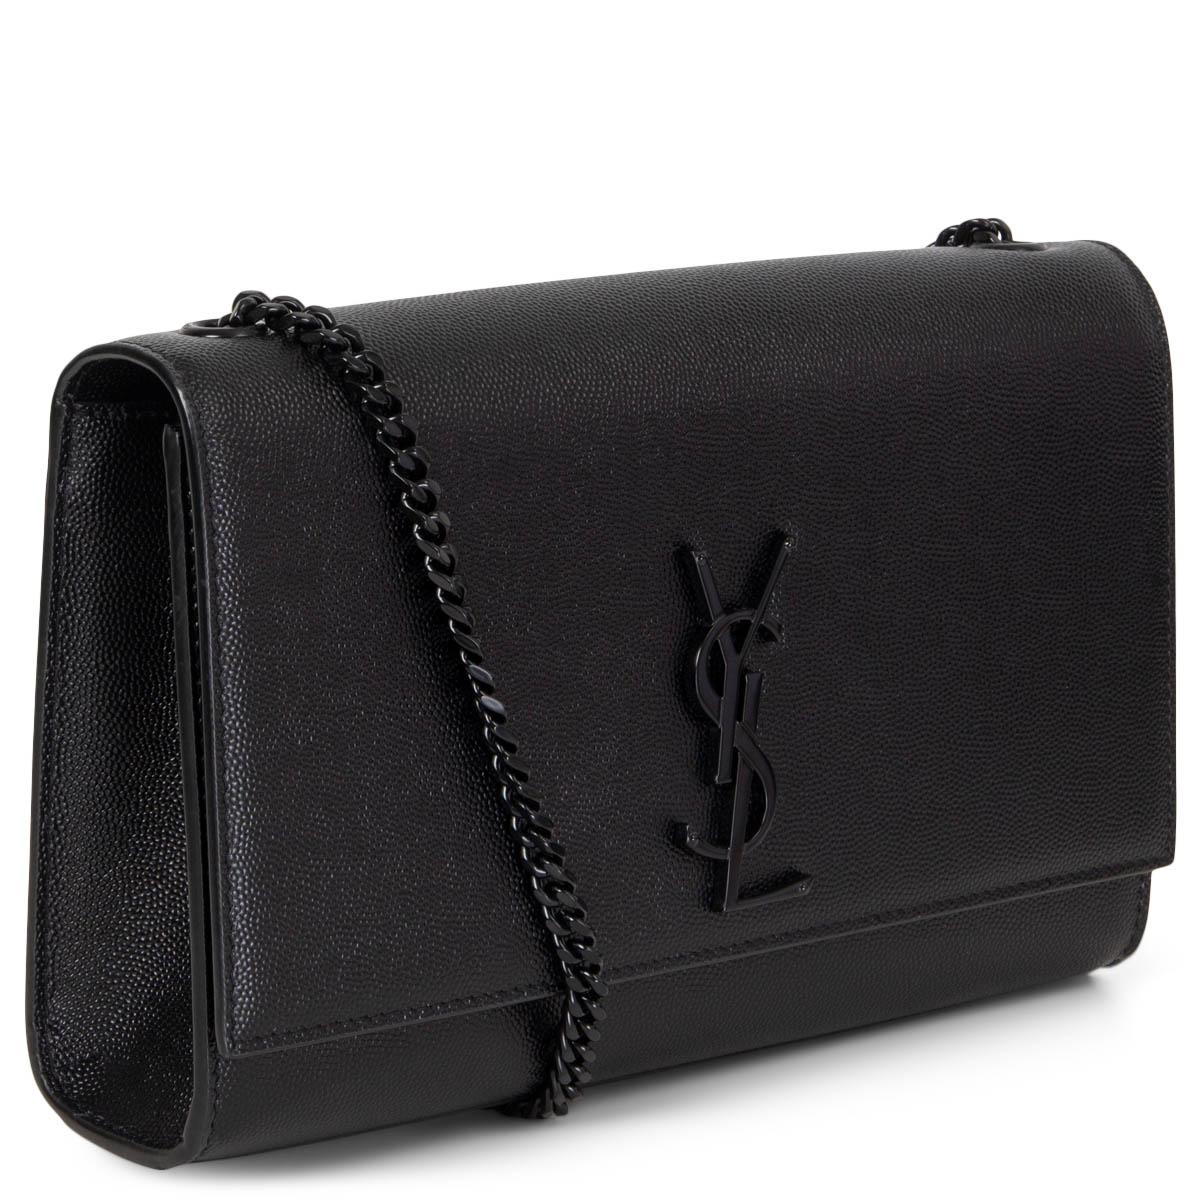 100% authentic Saint Laurent Kate Medium in black Grain De Poudre embossed leather featuring matte black metal chain shoulder strap and YSL initials at front. Open with a magnetic closure at front and is lined in black grosgrain with one slot pocket